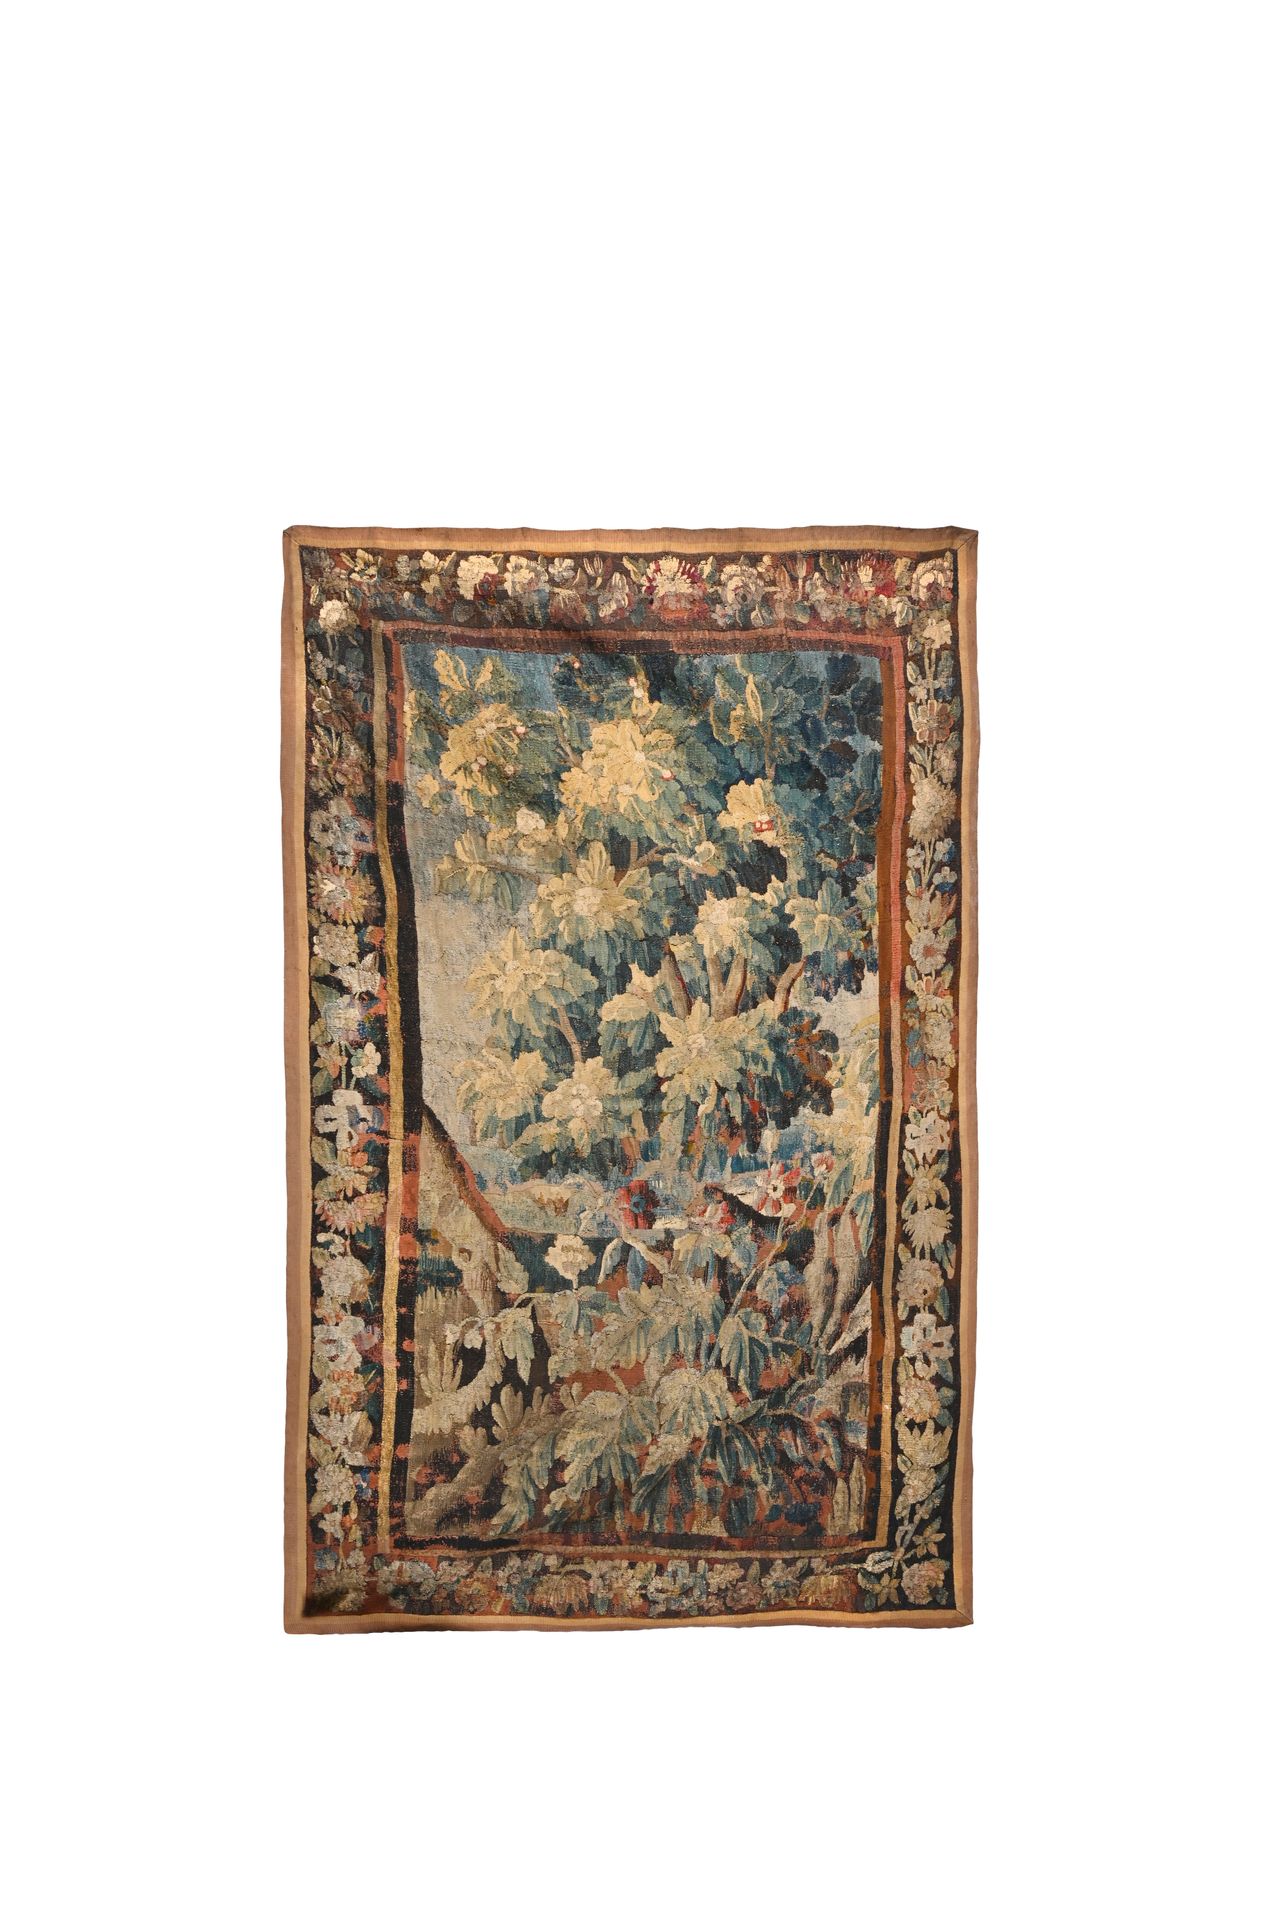 AUBUSSON Portière with greenery decoration

Early 18th century

l. 254 cm - L. 1&hellip;